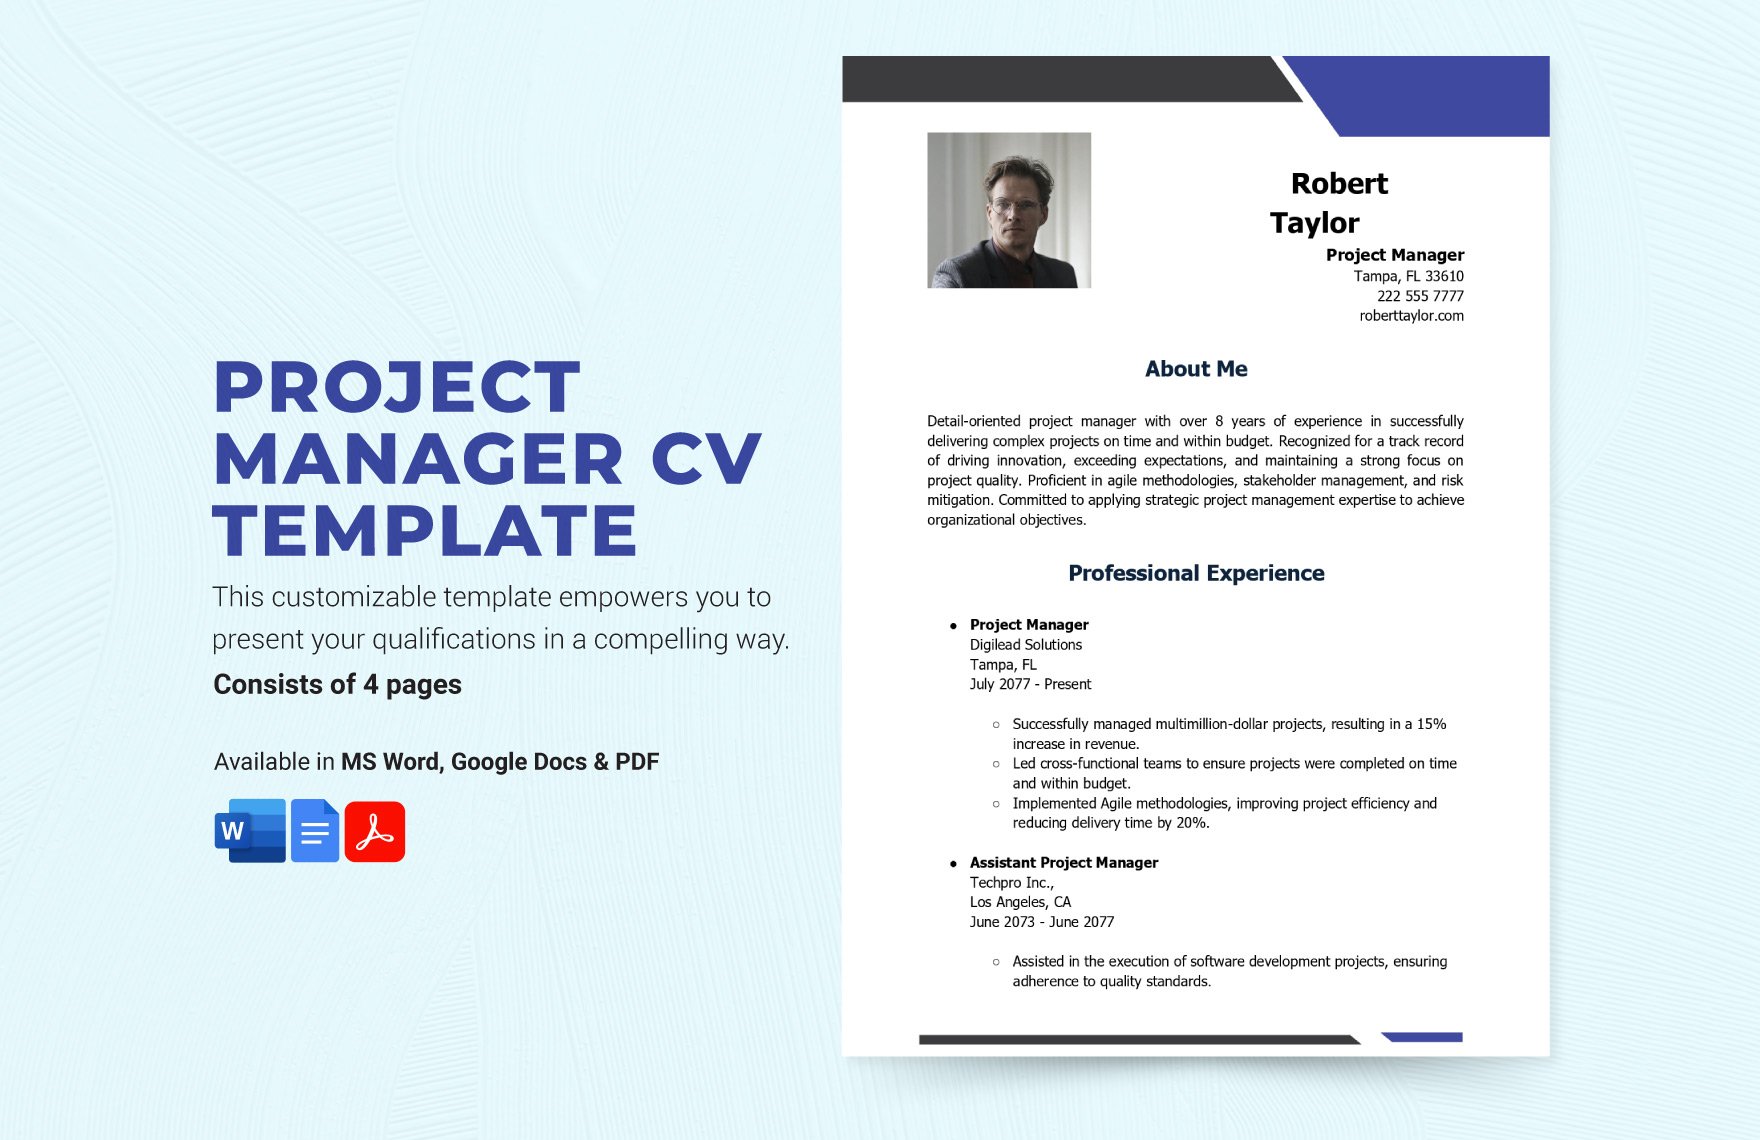 Project Manager CV Template